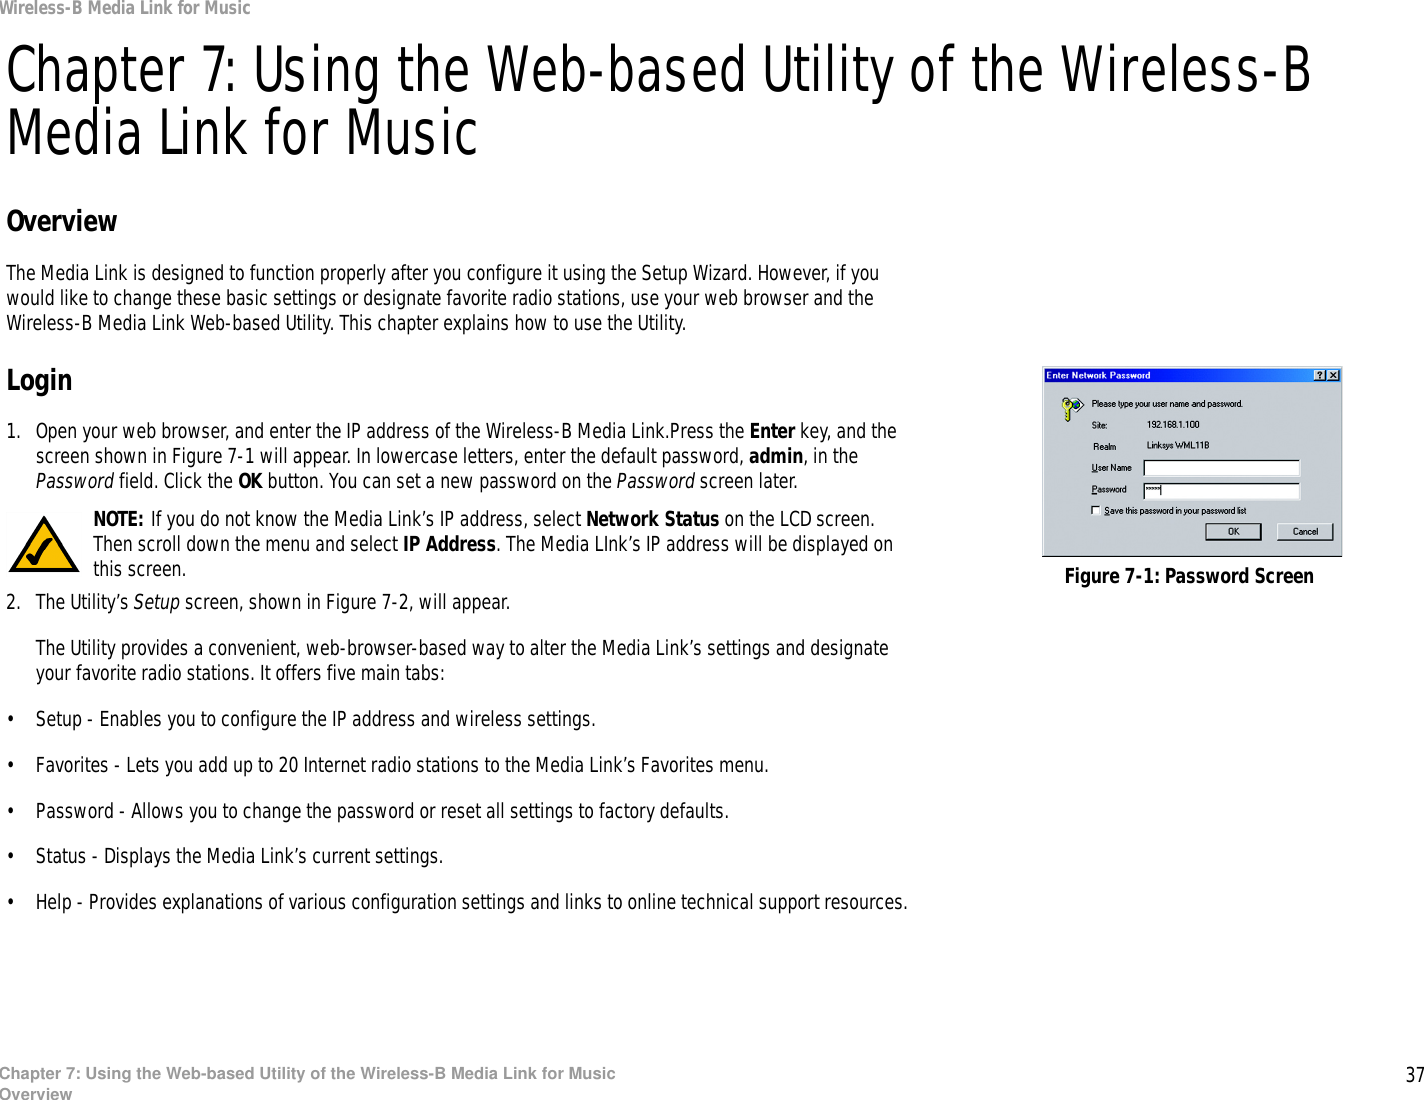 37Chapter 7: Using the Web-based Utility of the Wireless-B Media Link for MusicOverviewWireless-B Media Link for MusicChapter 7: Using the Web-based Utility of the Wireless-B Media Link for MusicOverviewThe Media Link is designed to function properly after you configure it using the Setup Wizard. However, if you would like to change these basic settings or designate favorite radio stations, use your web browser and the Wireless-B Media Link Web-based Utility. This chapter explains how to use the Utility.Login1. Open your web browser, and enter the IP address of the Wireless-B Media Link.Press the Enter key, and the screen shown in Figure 7-1 will appear. In lowercase letters, enter the default password, admin, in the Password field. Click the OK button. You can set a new password on the Password screen later.2. The Utility’s Setup screen, shown in Figure 7-2, will appear. The Utility provides a convenient, web-browser-based way to alter the Media Link’s settings and designate your favorite radio stations. It offers five main tabs:• Setup - Enables you to configure the IP address and wireless settings.• Favorites - Lets you add up to 20 Internet radio stations to the Media Link’s Favorites menu.• Password - Allows you to change the password or reset all settings to factory defaults.• Status - Displays the Media Link’s current settings.• Help - Provides explanations of various configuration settings and links to online technical support resources.Figure 7-1: Password ScreenNOTE: If you do not know the Media Link’s IP address, select Network Status on the LCD screen. Then scroll down the menu and select IP Address. The Media LInk’s IP address will be displayed on this screen. 